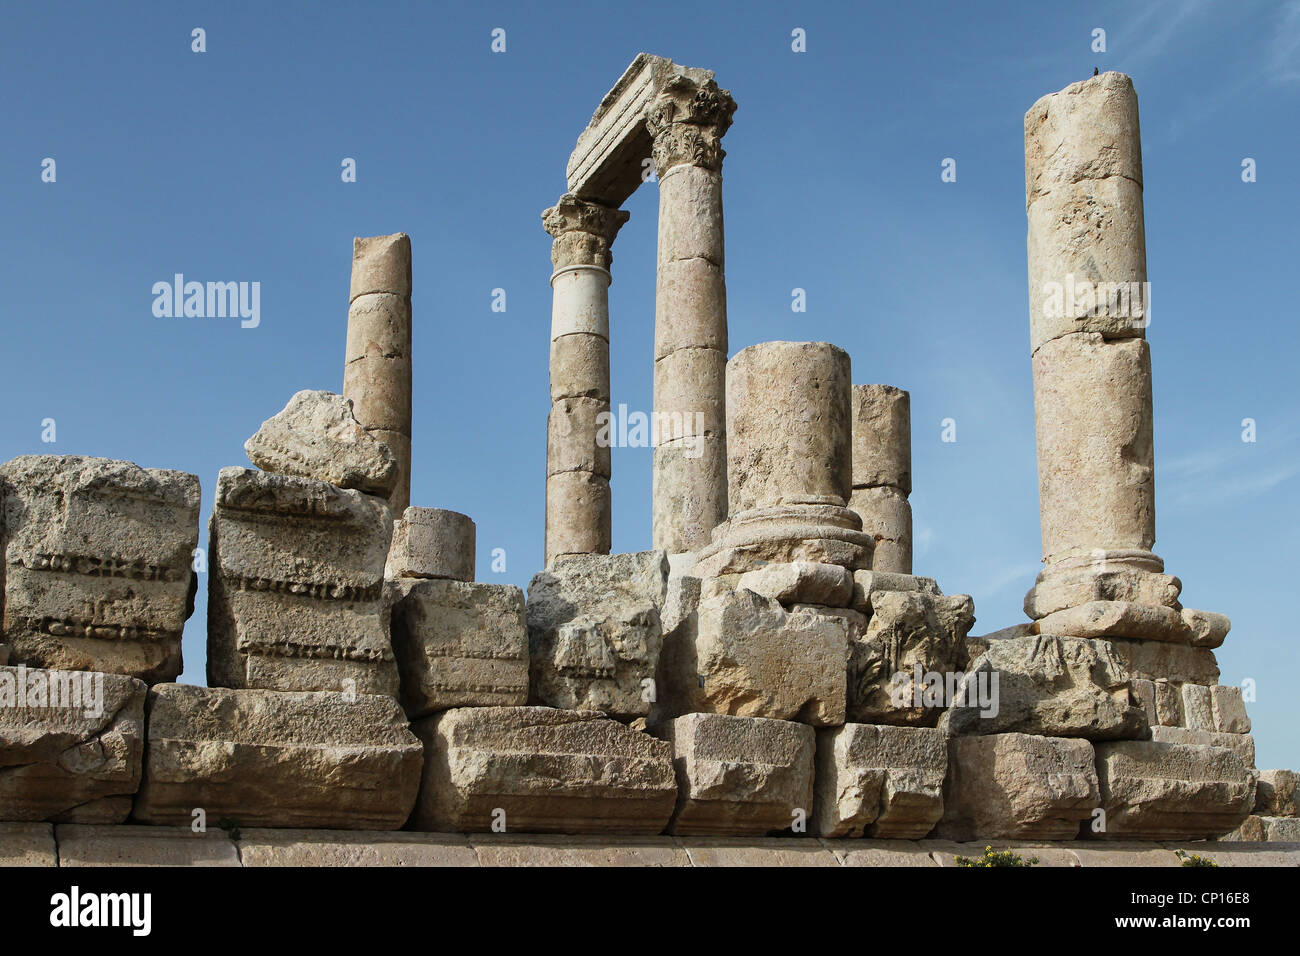 Remains of the Temple of Hercules on the Citadel Hill (Jabal al-Qal'a) at the center of downtown Amman, Jordan. Stock Photo